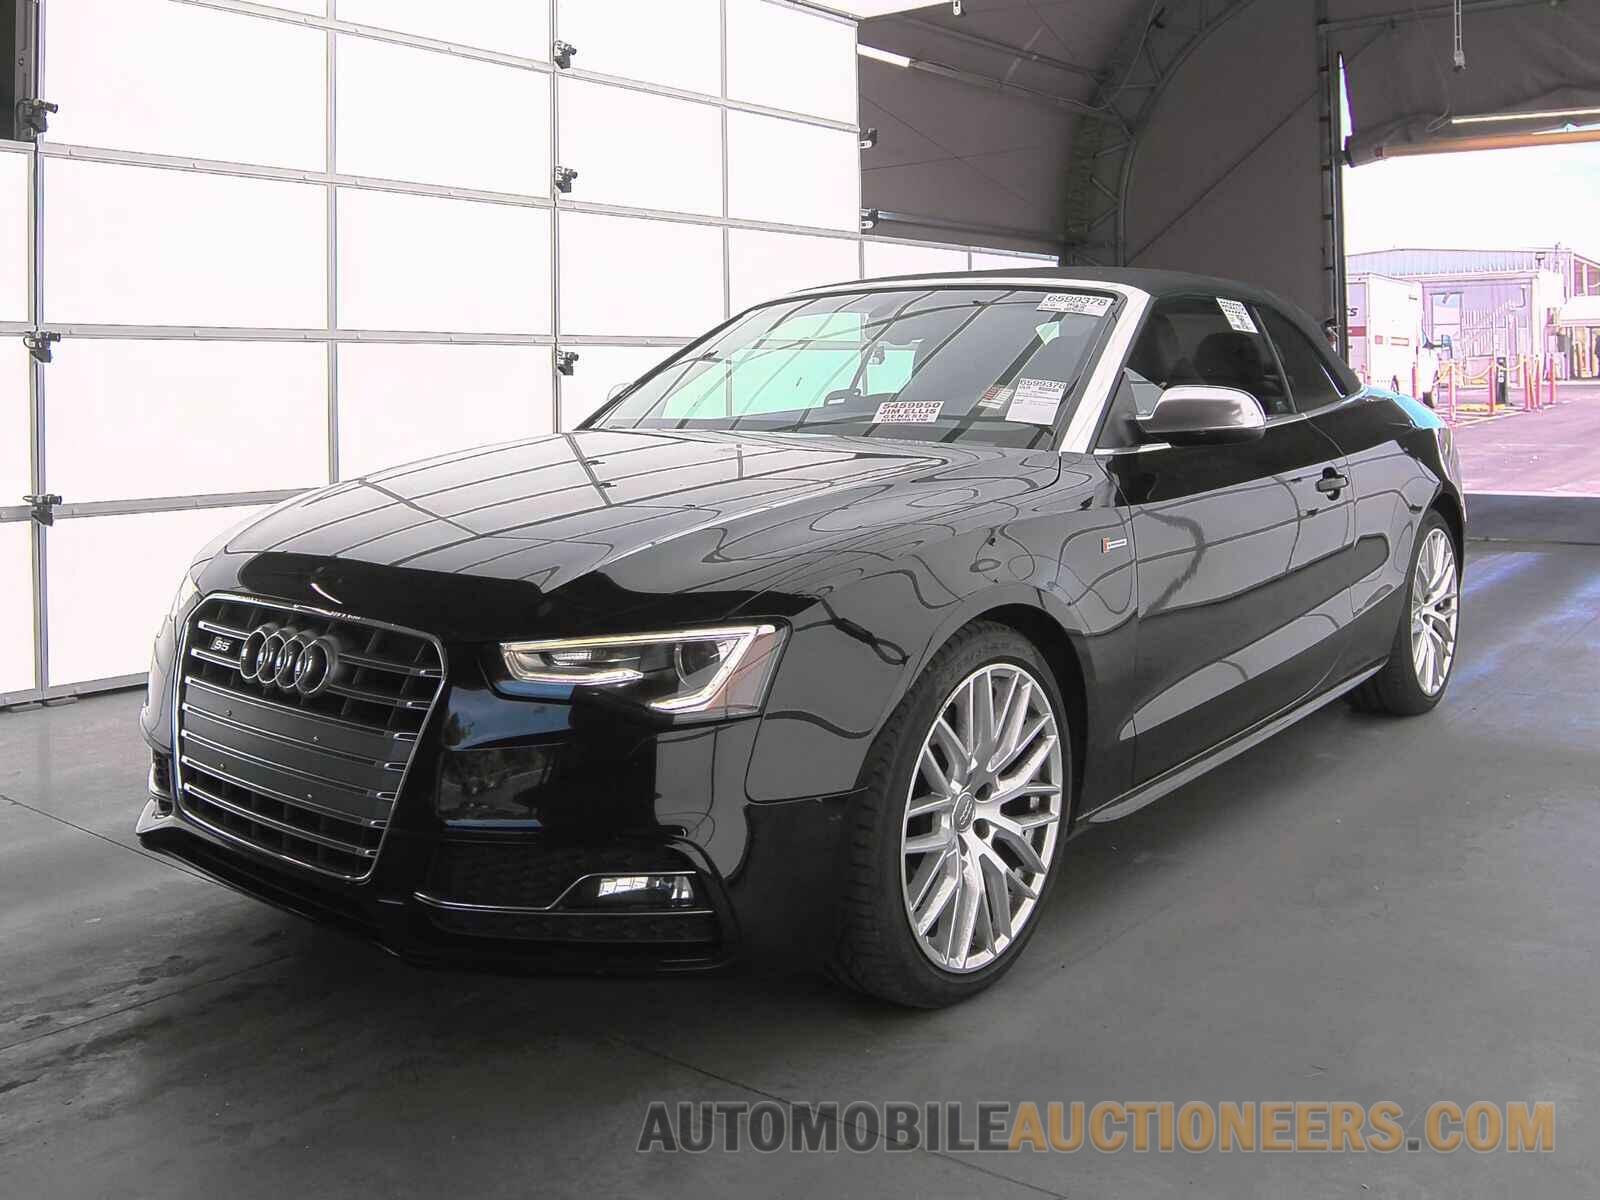 WAUCGAFH1FN004109 Audi S5 Cabriolet 2015